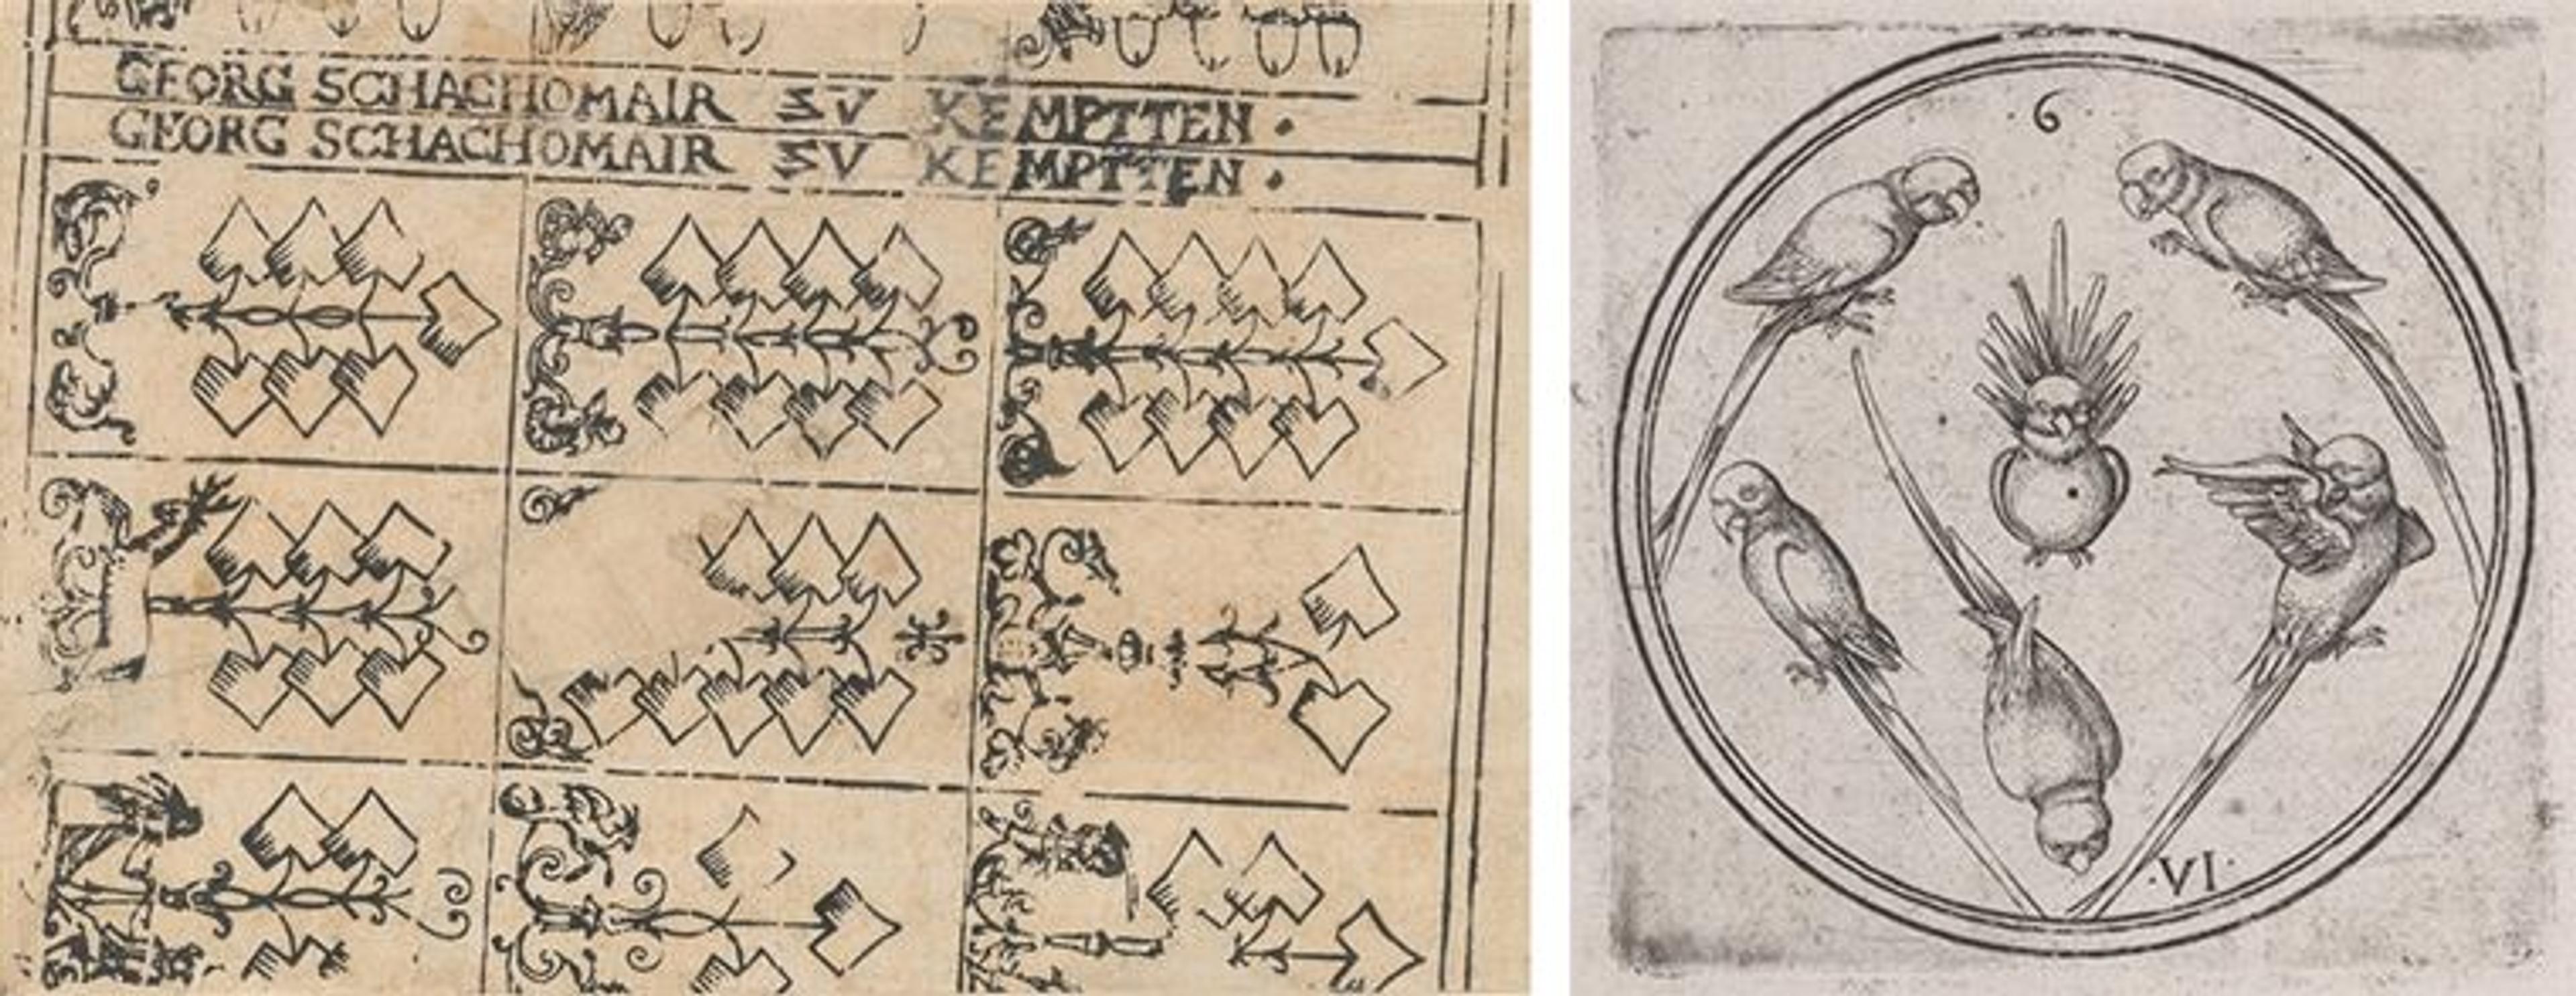 Left: an aged printed sheet of playing cards with text in German. Right: a square card featuring six parrots within a circle.